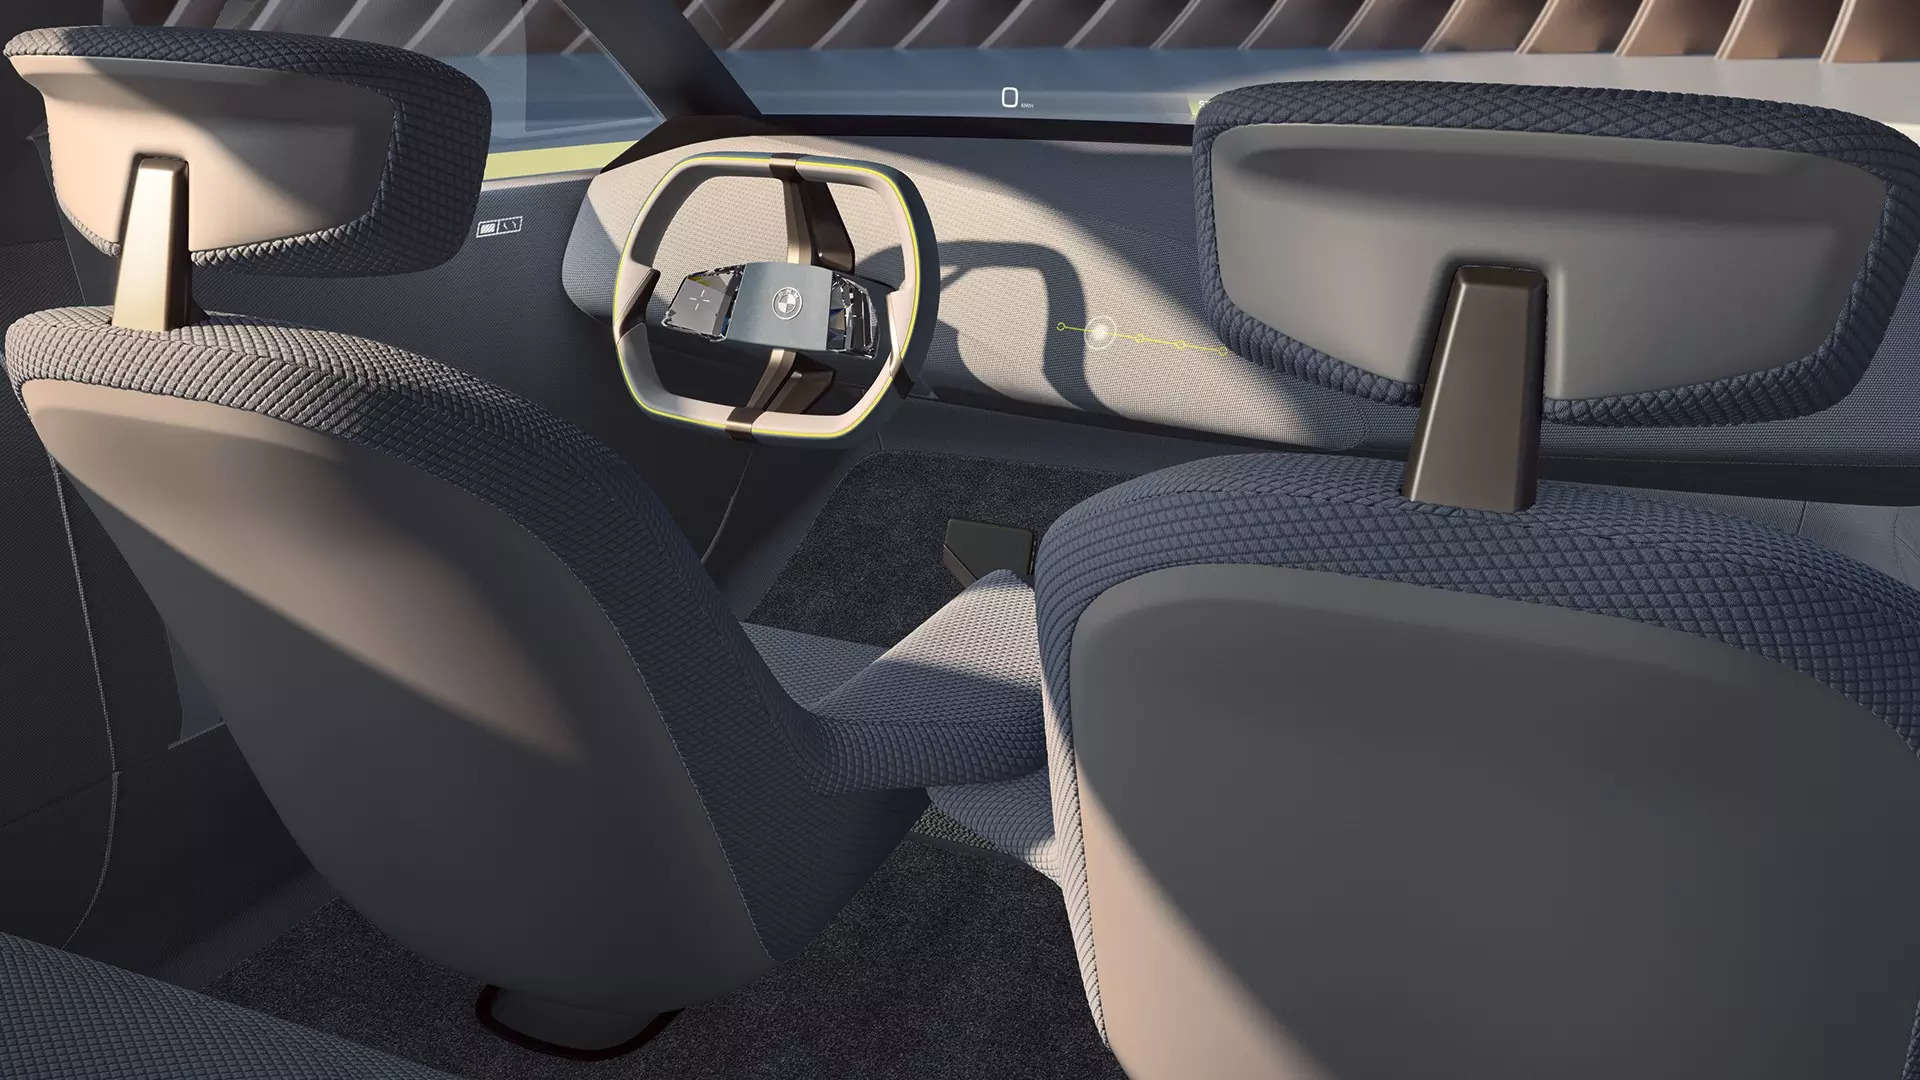 The i Vision Dee interior